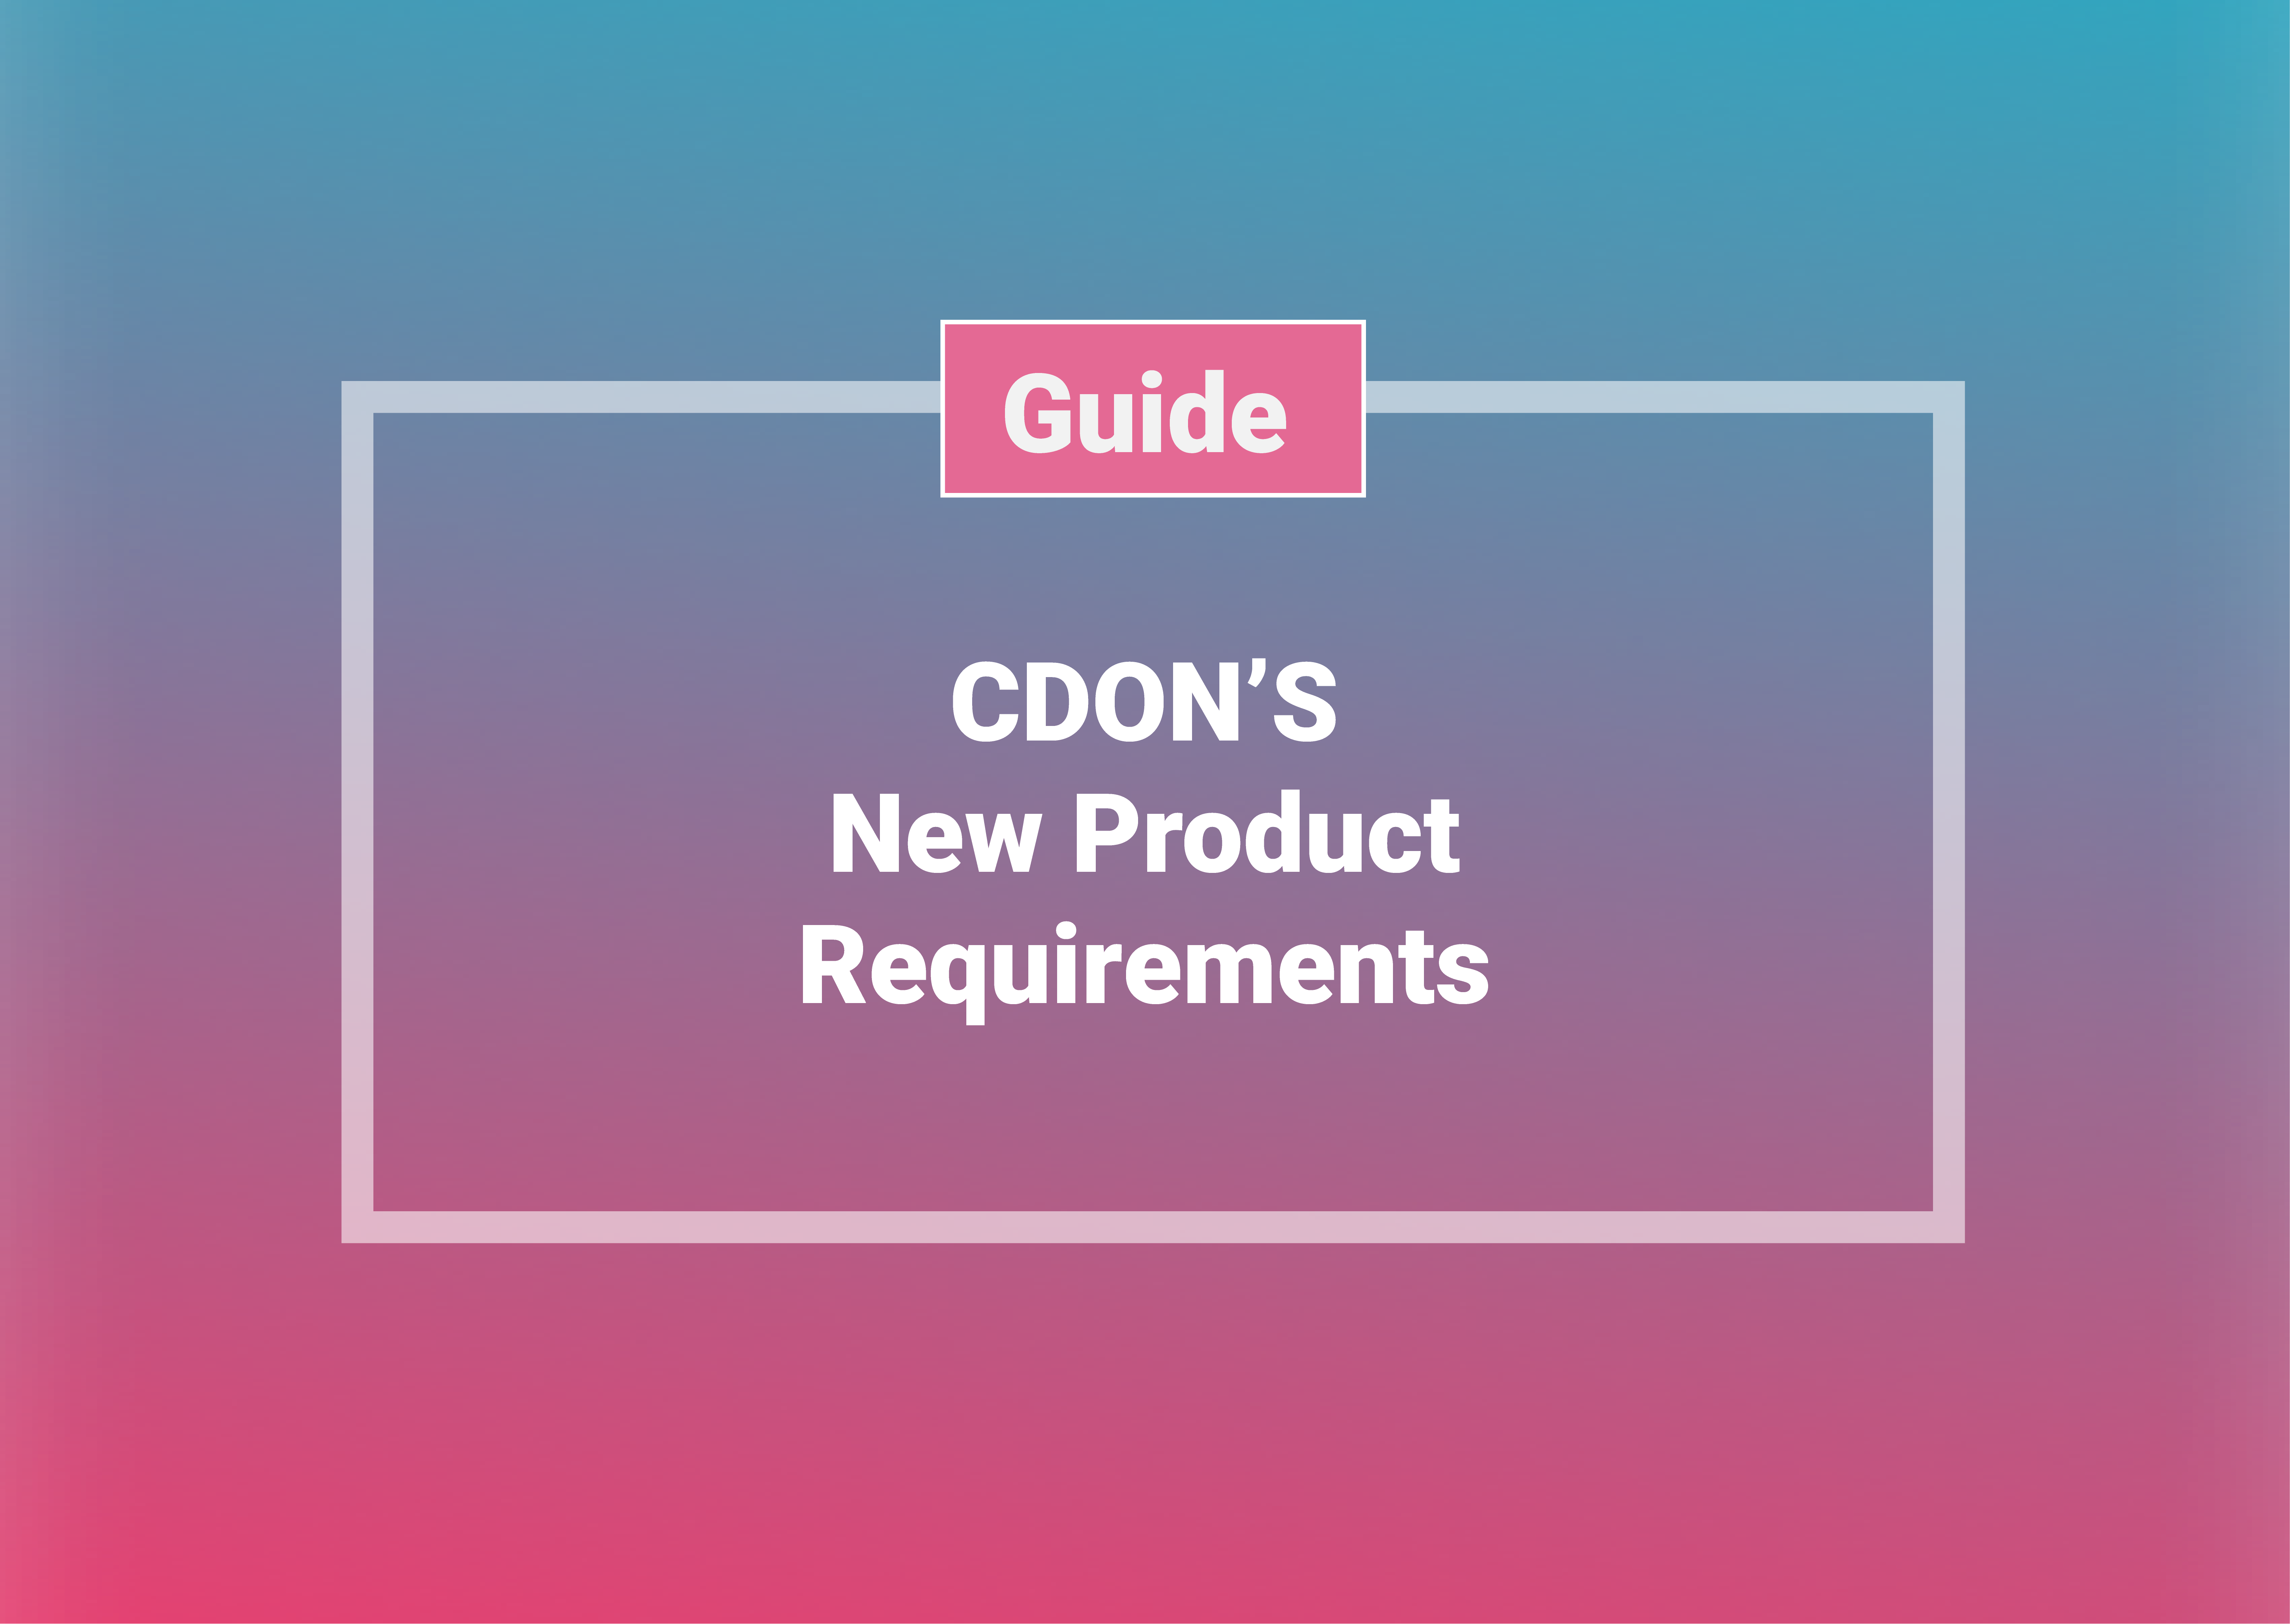 CDON - New Product Requirements